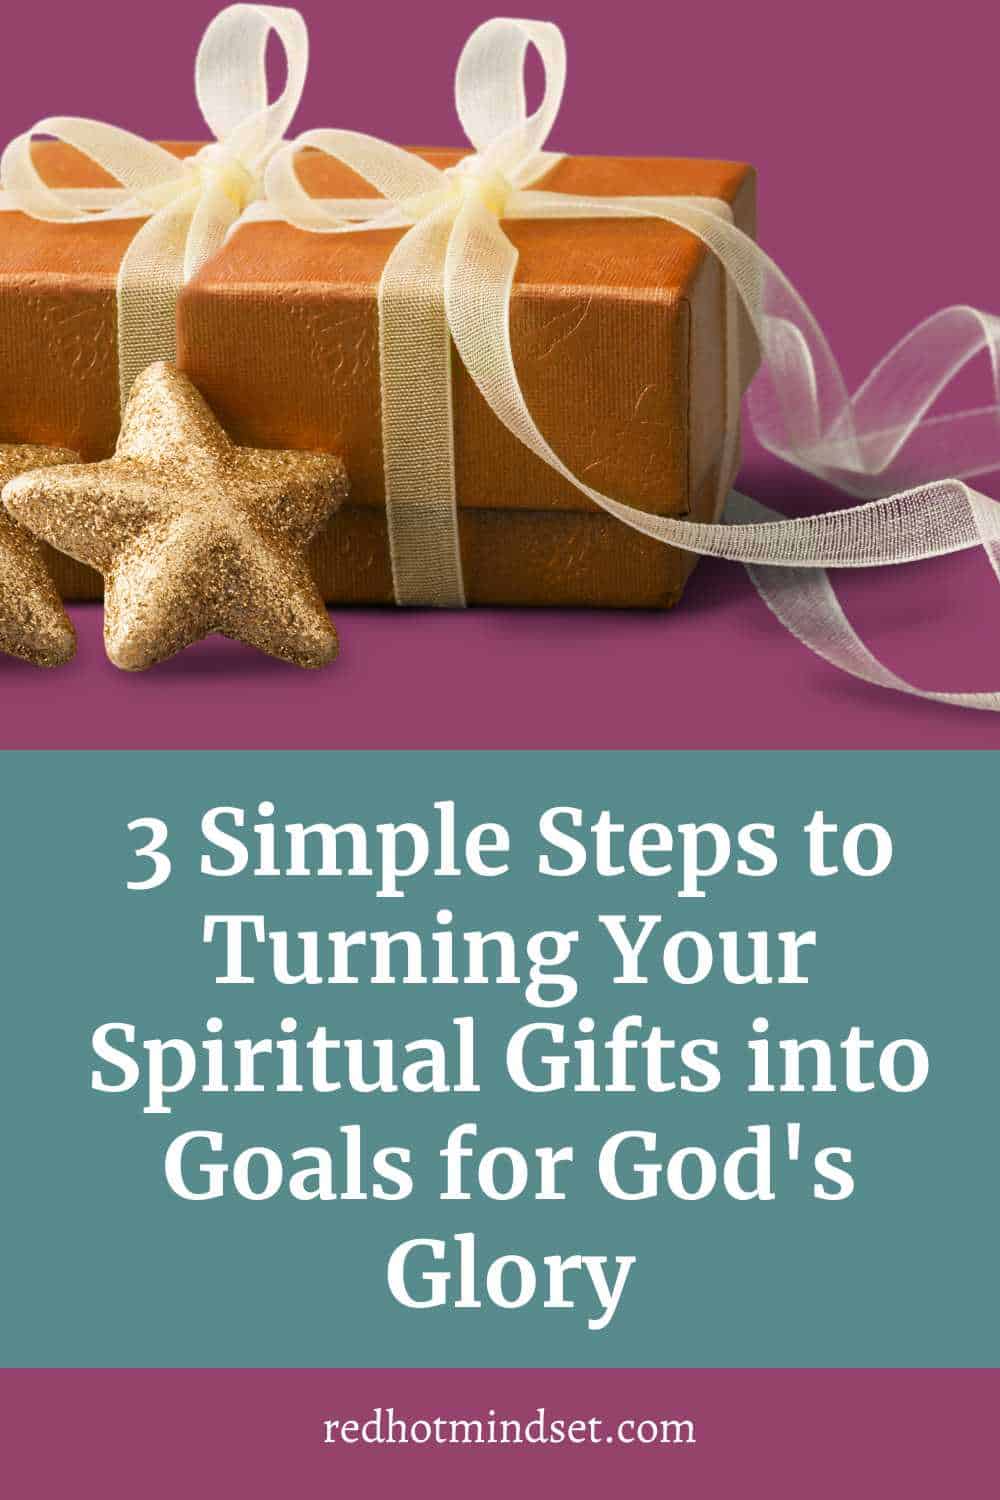 Ep 181 | 3 Simple Steps to Turning Your Spiritual Gifts into Goals for God’s Glory